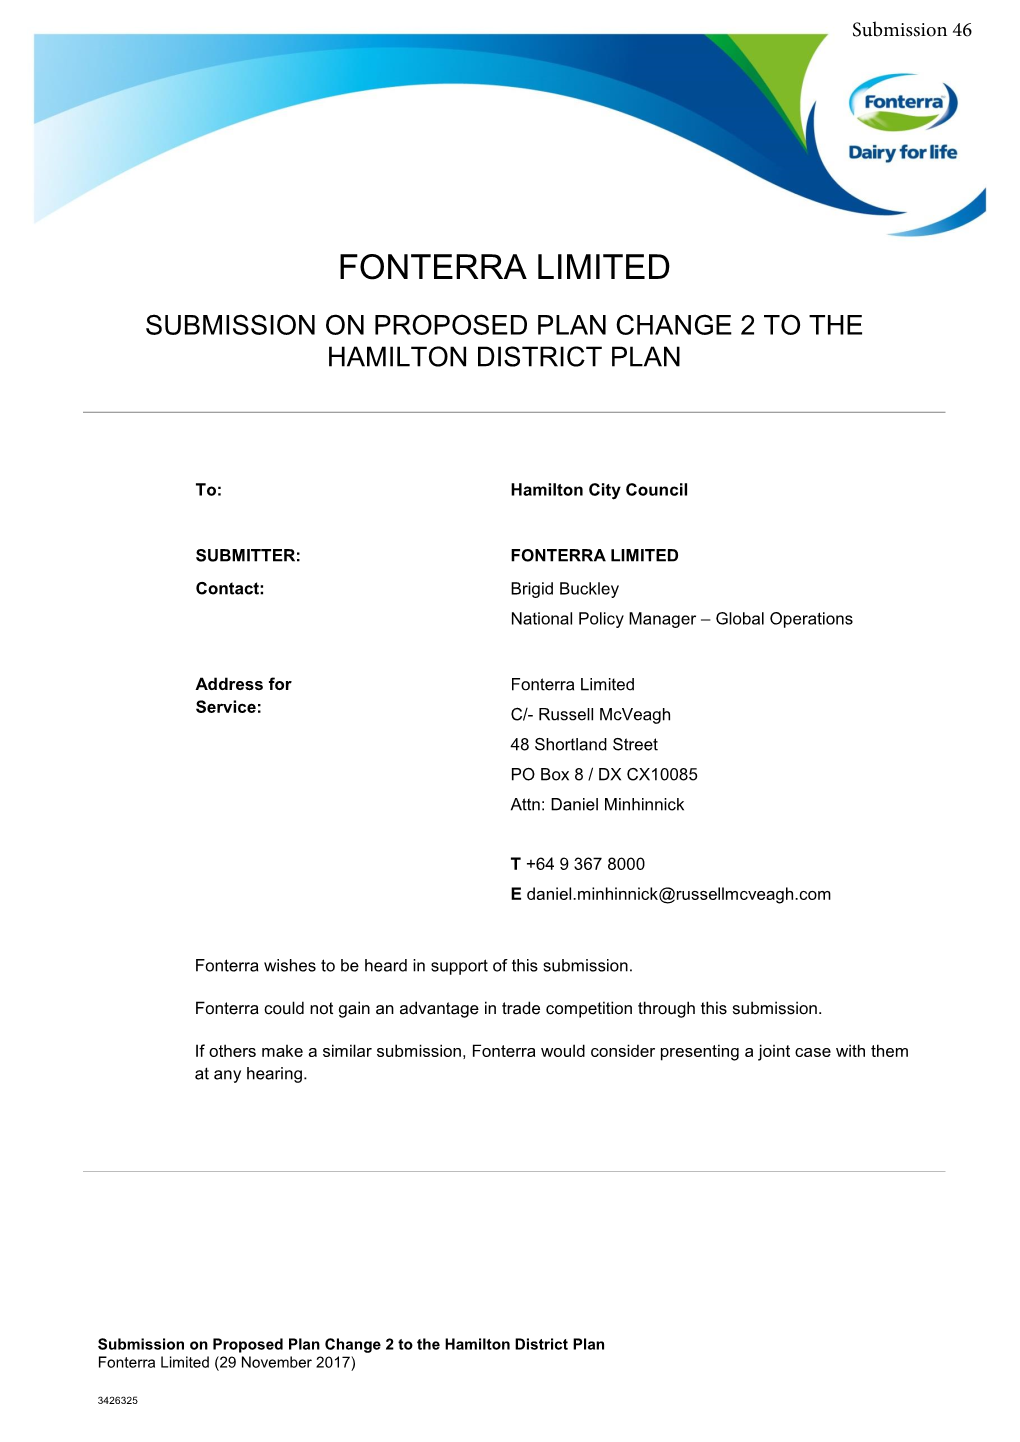 Fonterra Limited Submission on Proposed Plan Change 2 to the Hamilton District Plan